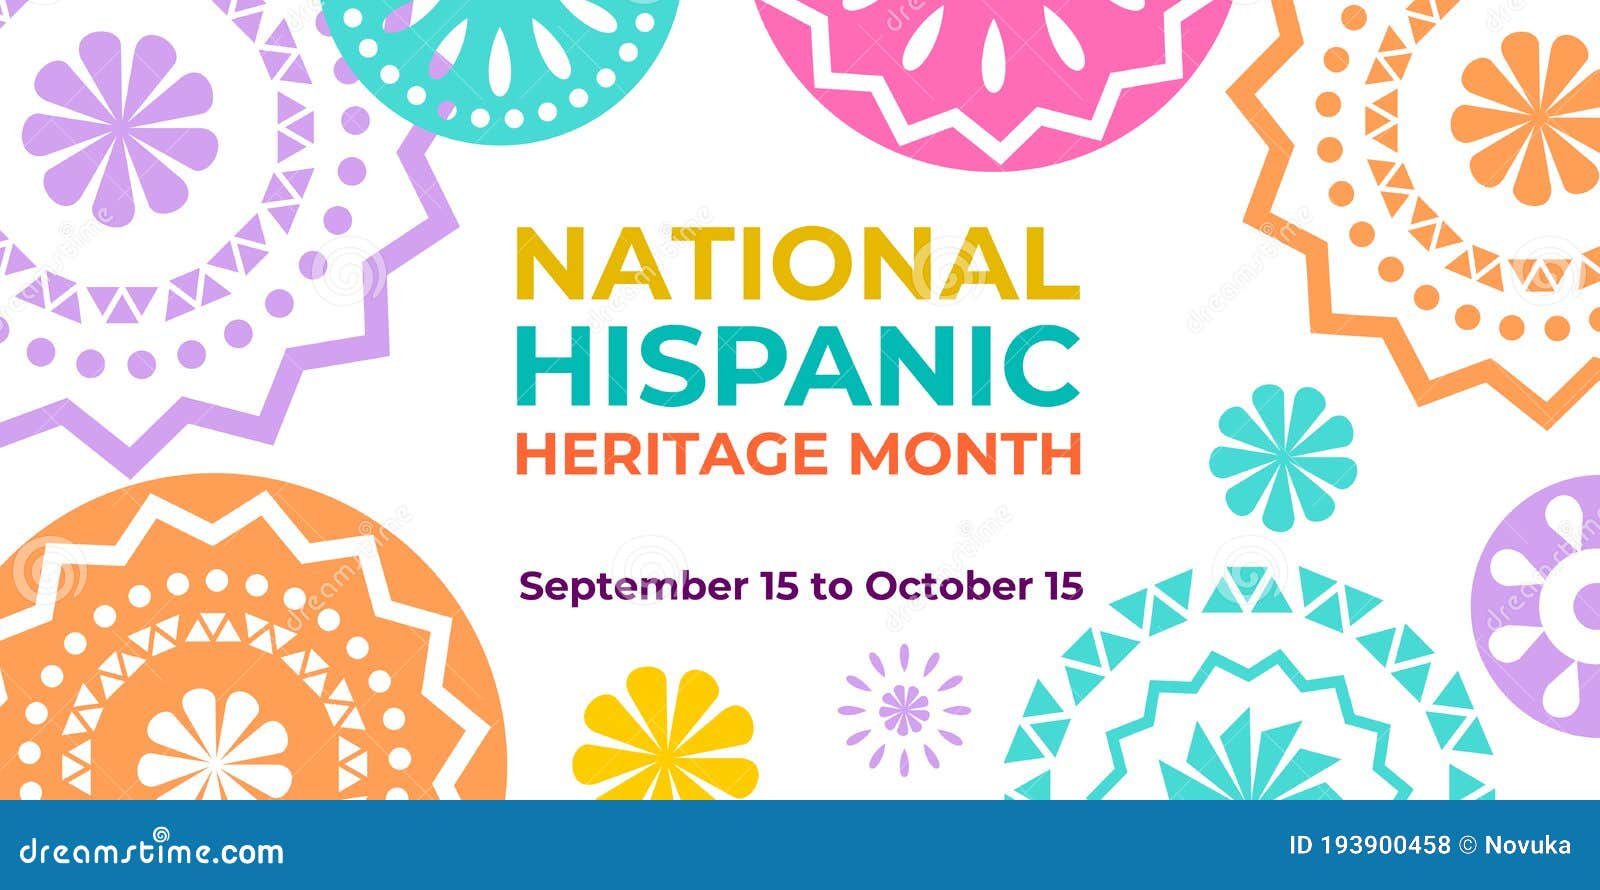 hispanic heritage month.  web banner, poster, card for social media and networks. greeting with national hispanic heritage